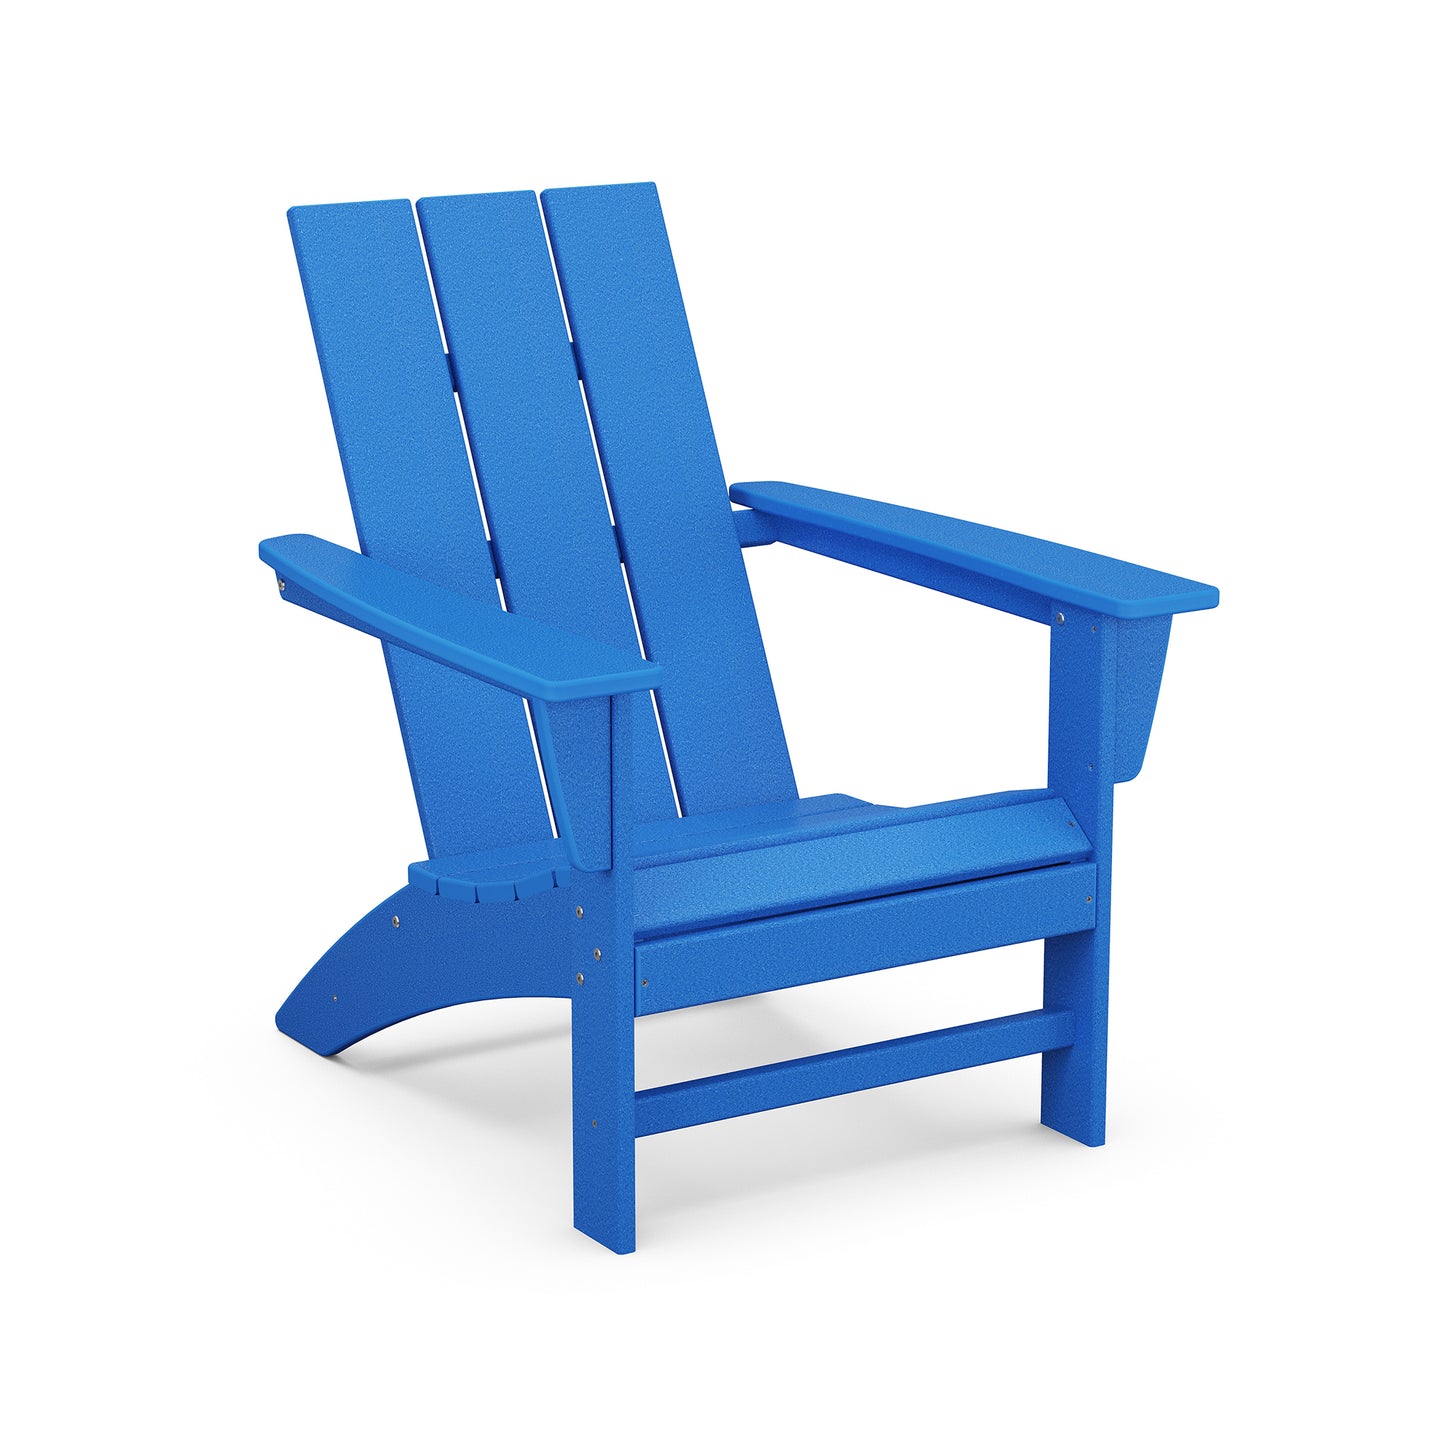 A vibrant blue outdoor POLYWOOD Modern Adirondack chair, featuring a slatted back and seat design, with wide armrests, isolated on a white background.